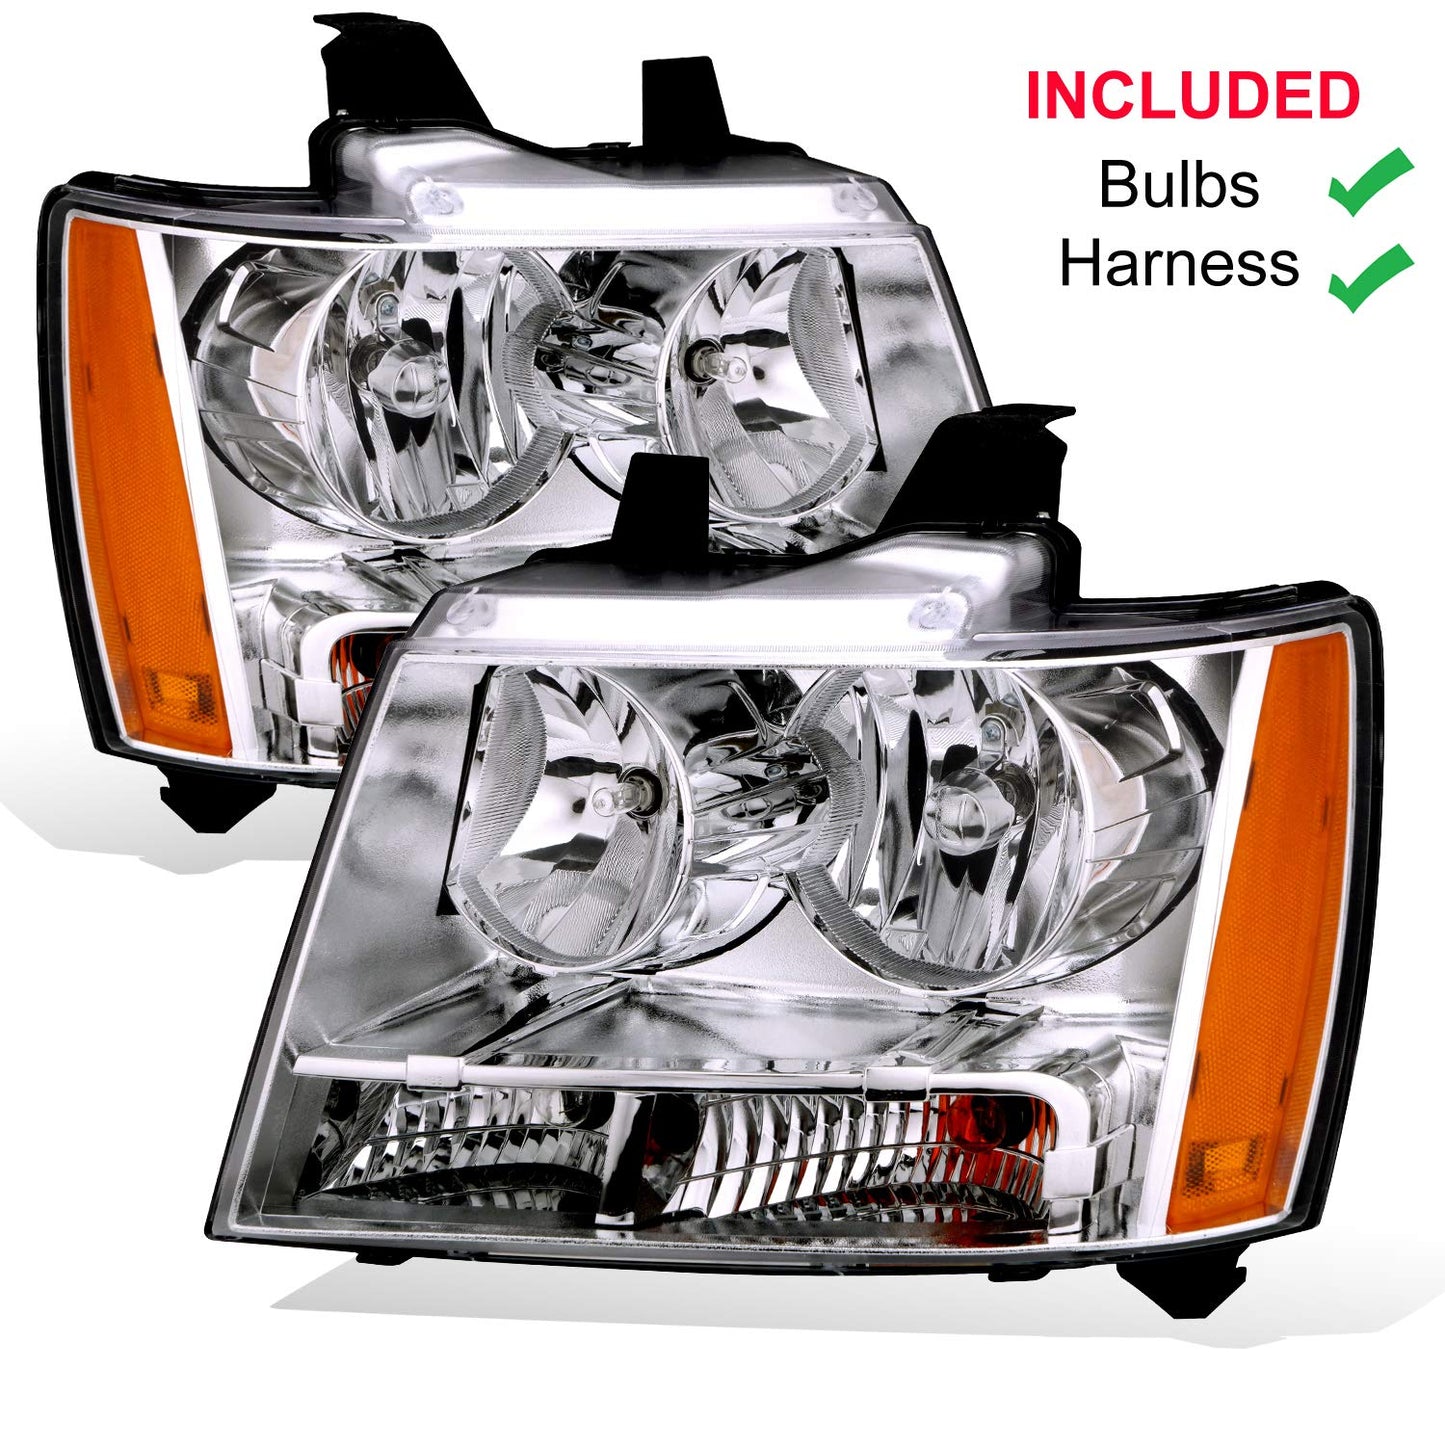 AmeriLite for Chevy 07-13 Tahoe/Suburban/Avalanche Factory Style Replacement Headlights Pair - Driver and Passenger Side Chrome Housing